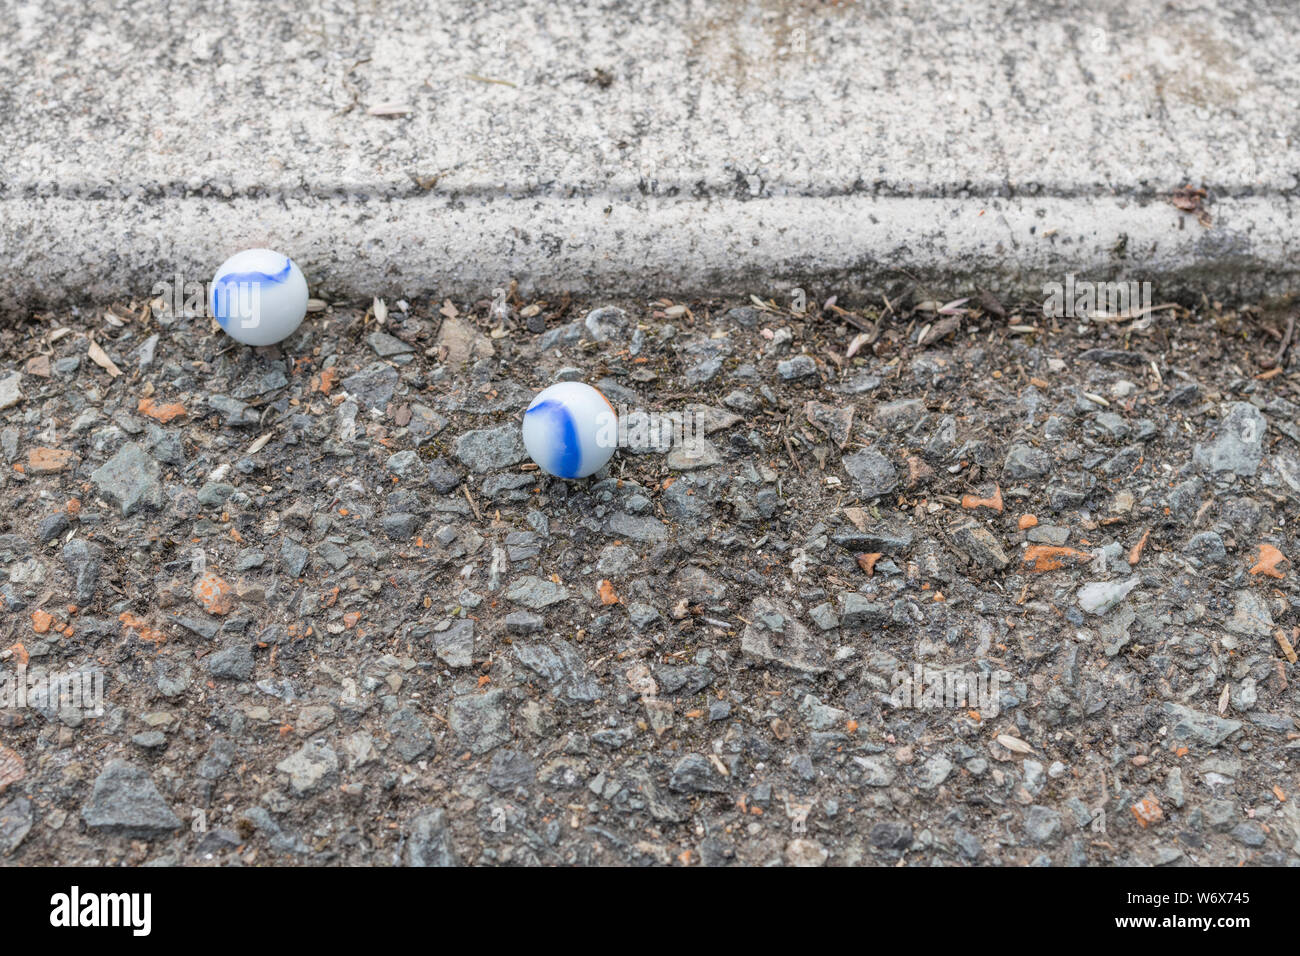 White glass marbles on kerbside tarmac surface. Metaphor something lost, mental health, losing your marbles, childhood games, losing the plot. Stock Photo